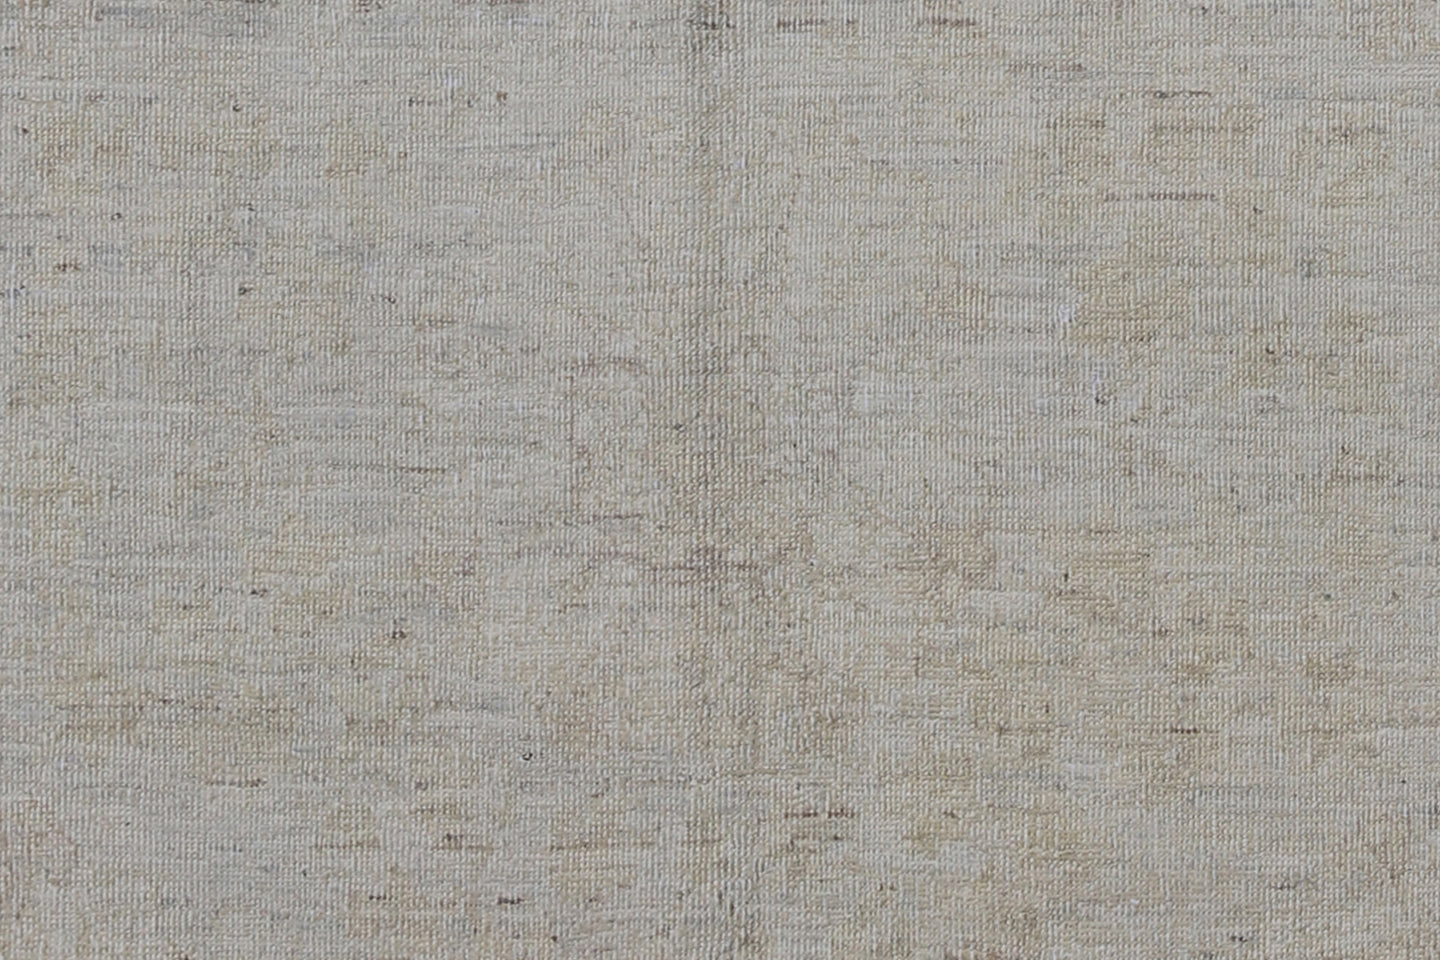 5'x6' Ariana Traditional Washed-out Floral Rug